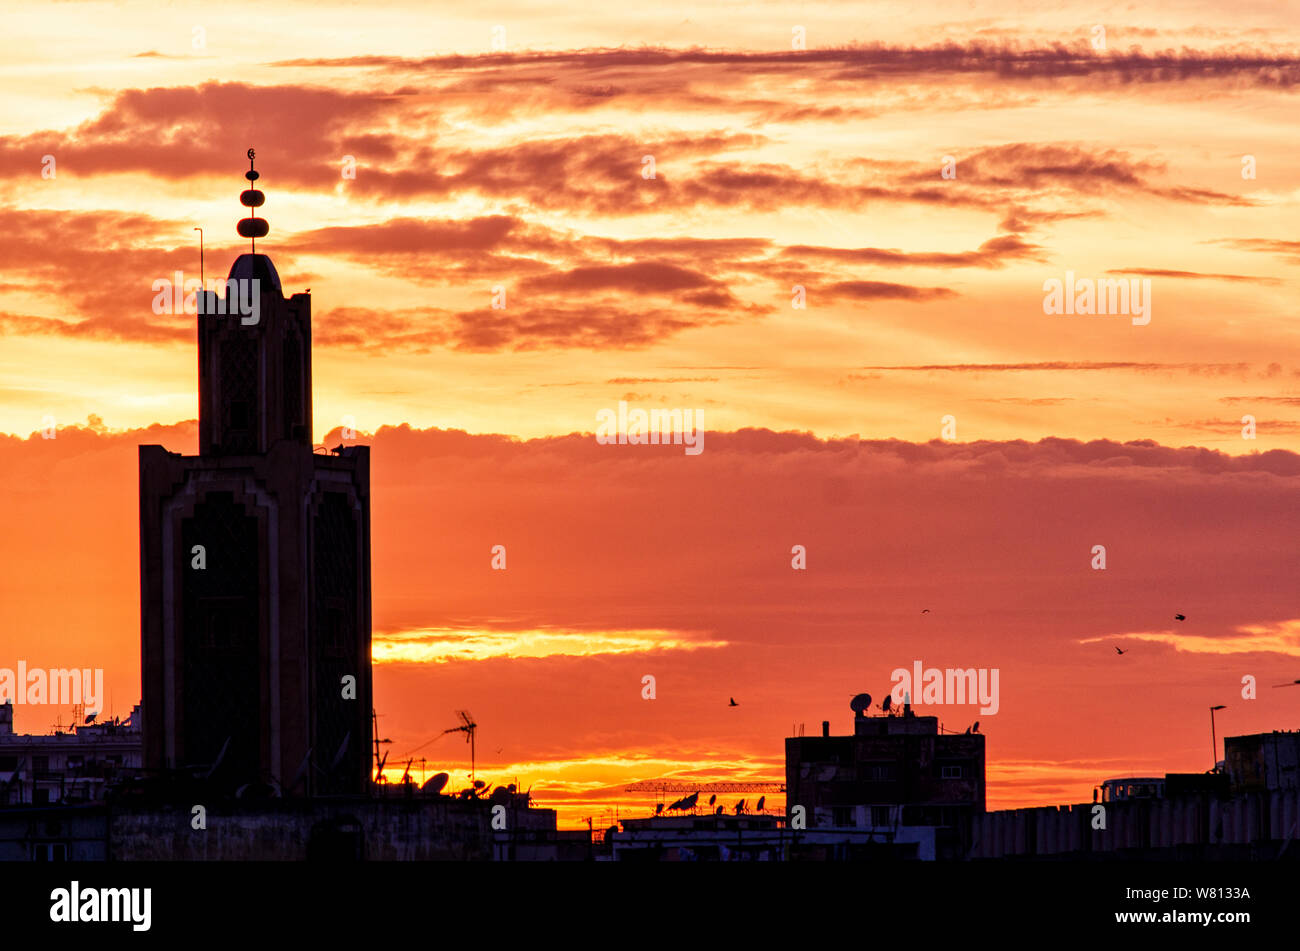 Sunset in Casablanca, Morocco by Abd-Elilah Ouassif. Stock Photo